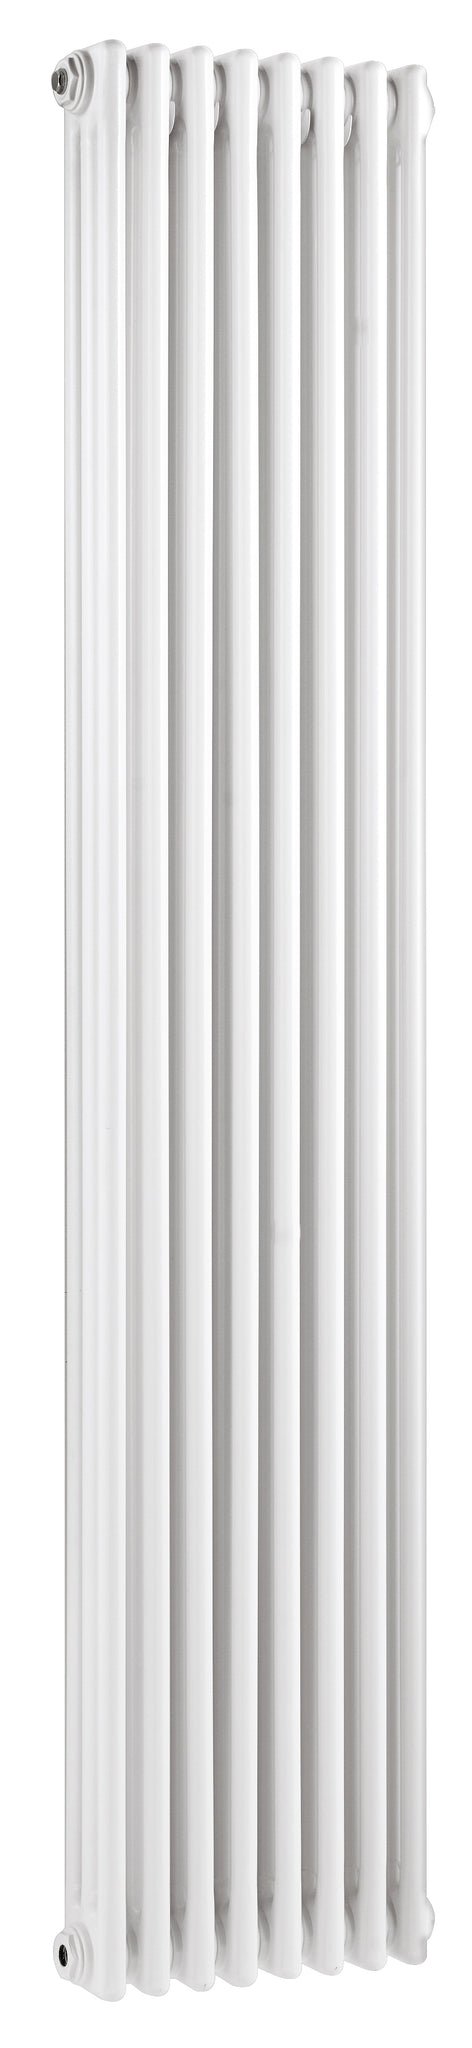 Hudson Reed Colosseum Traditional Triple Radiator 1800mmx376mm